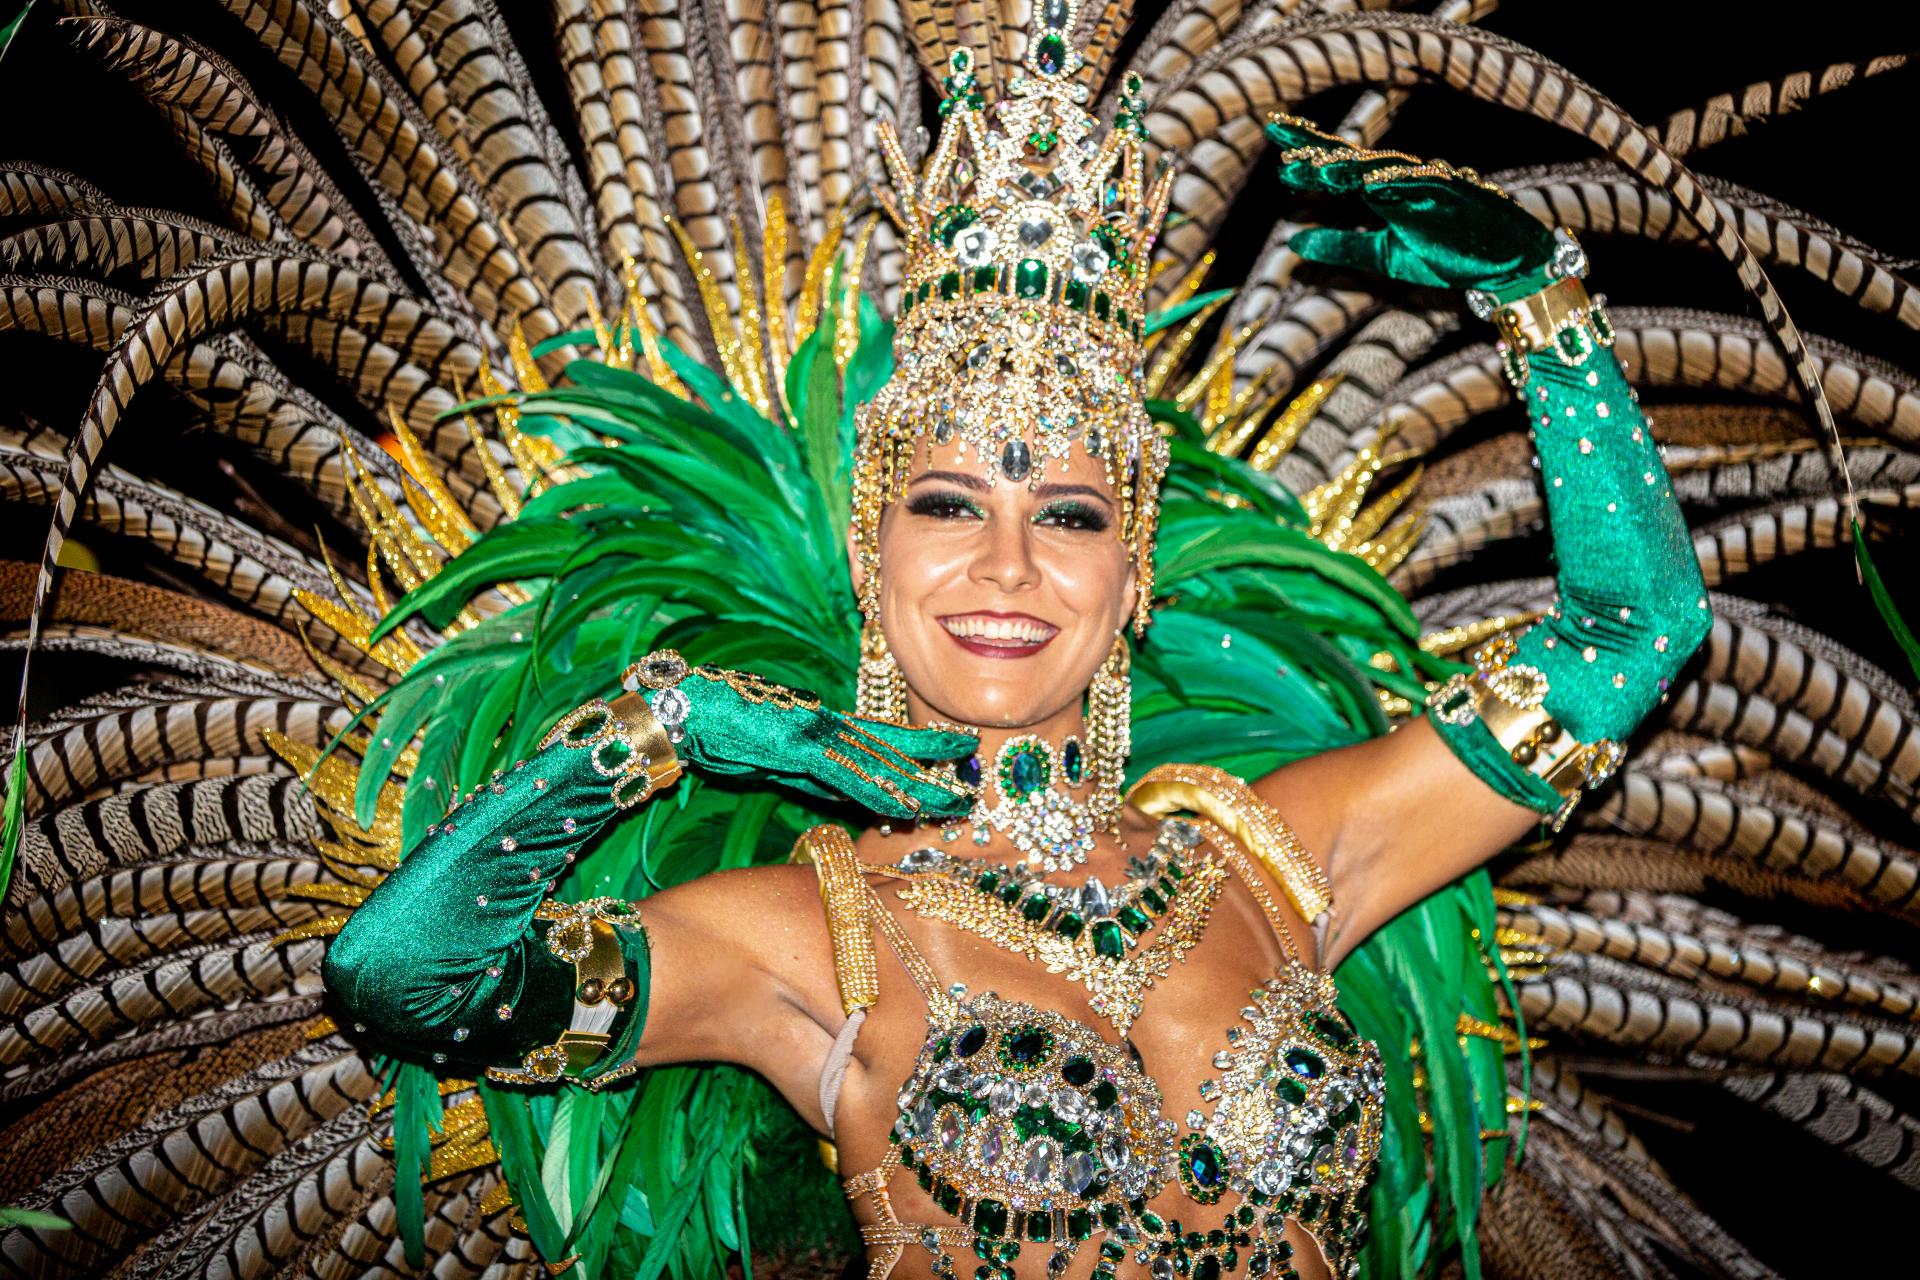 Brazilian costumes: colorful and lively